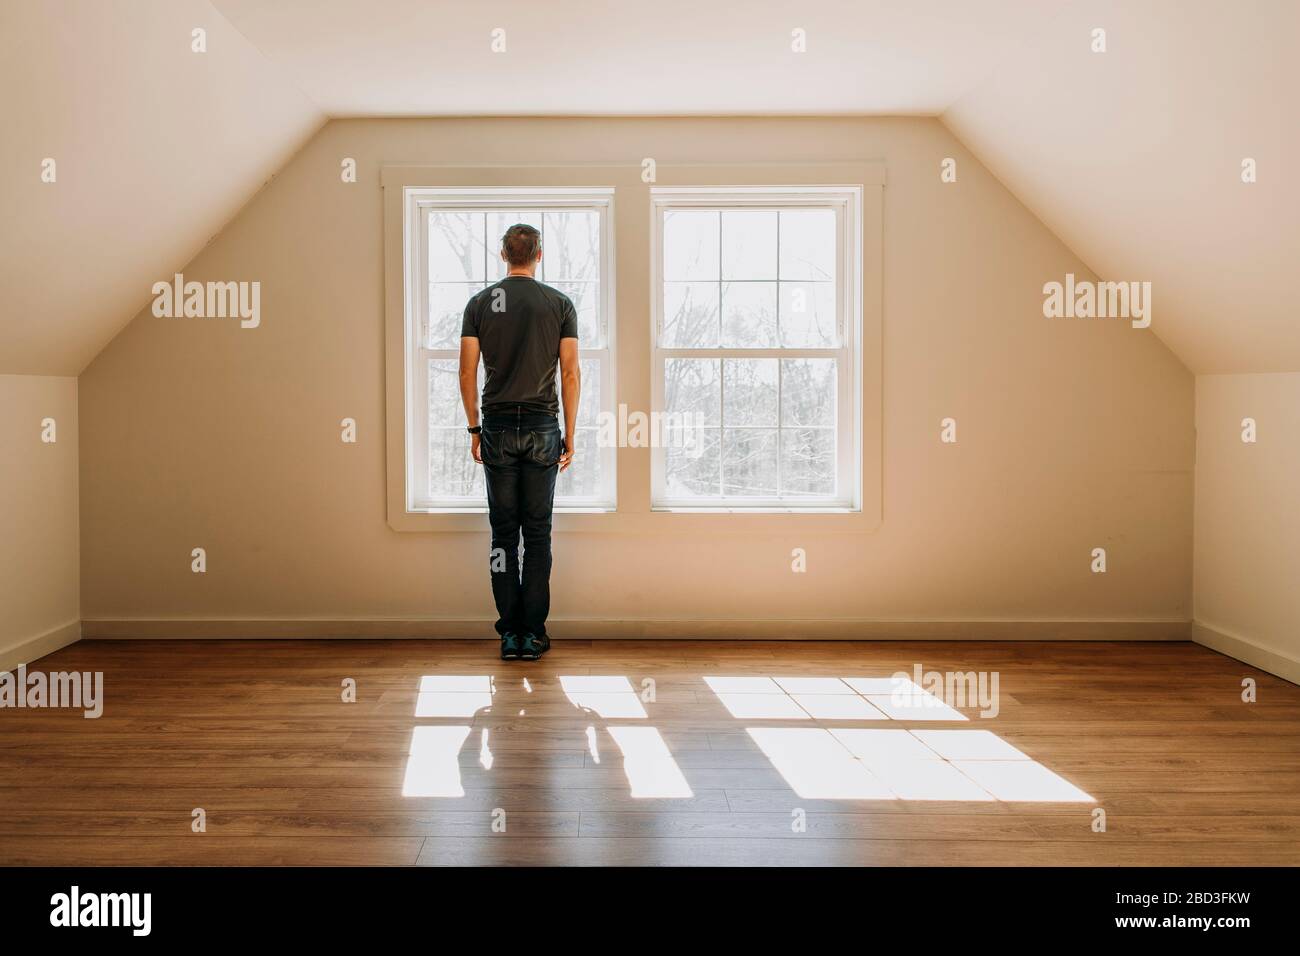 man stands in front of interior window in empty lonely minimalist room Stock Photo